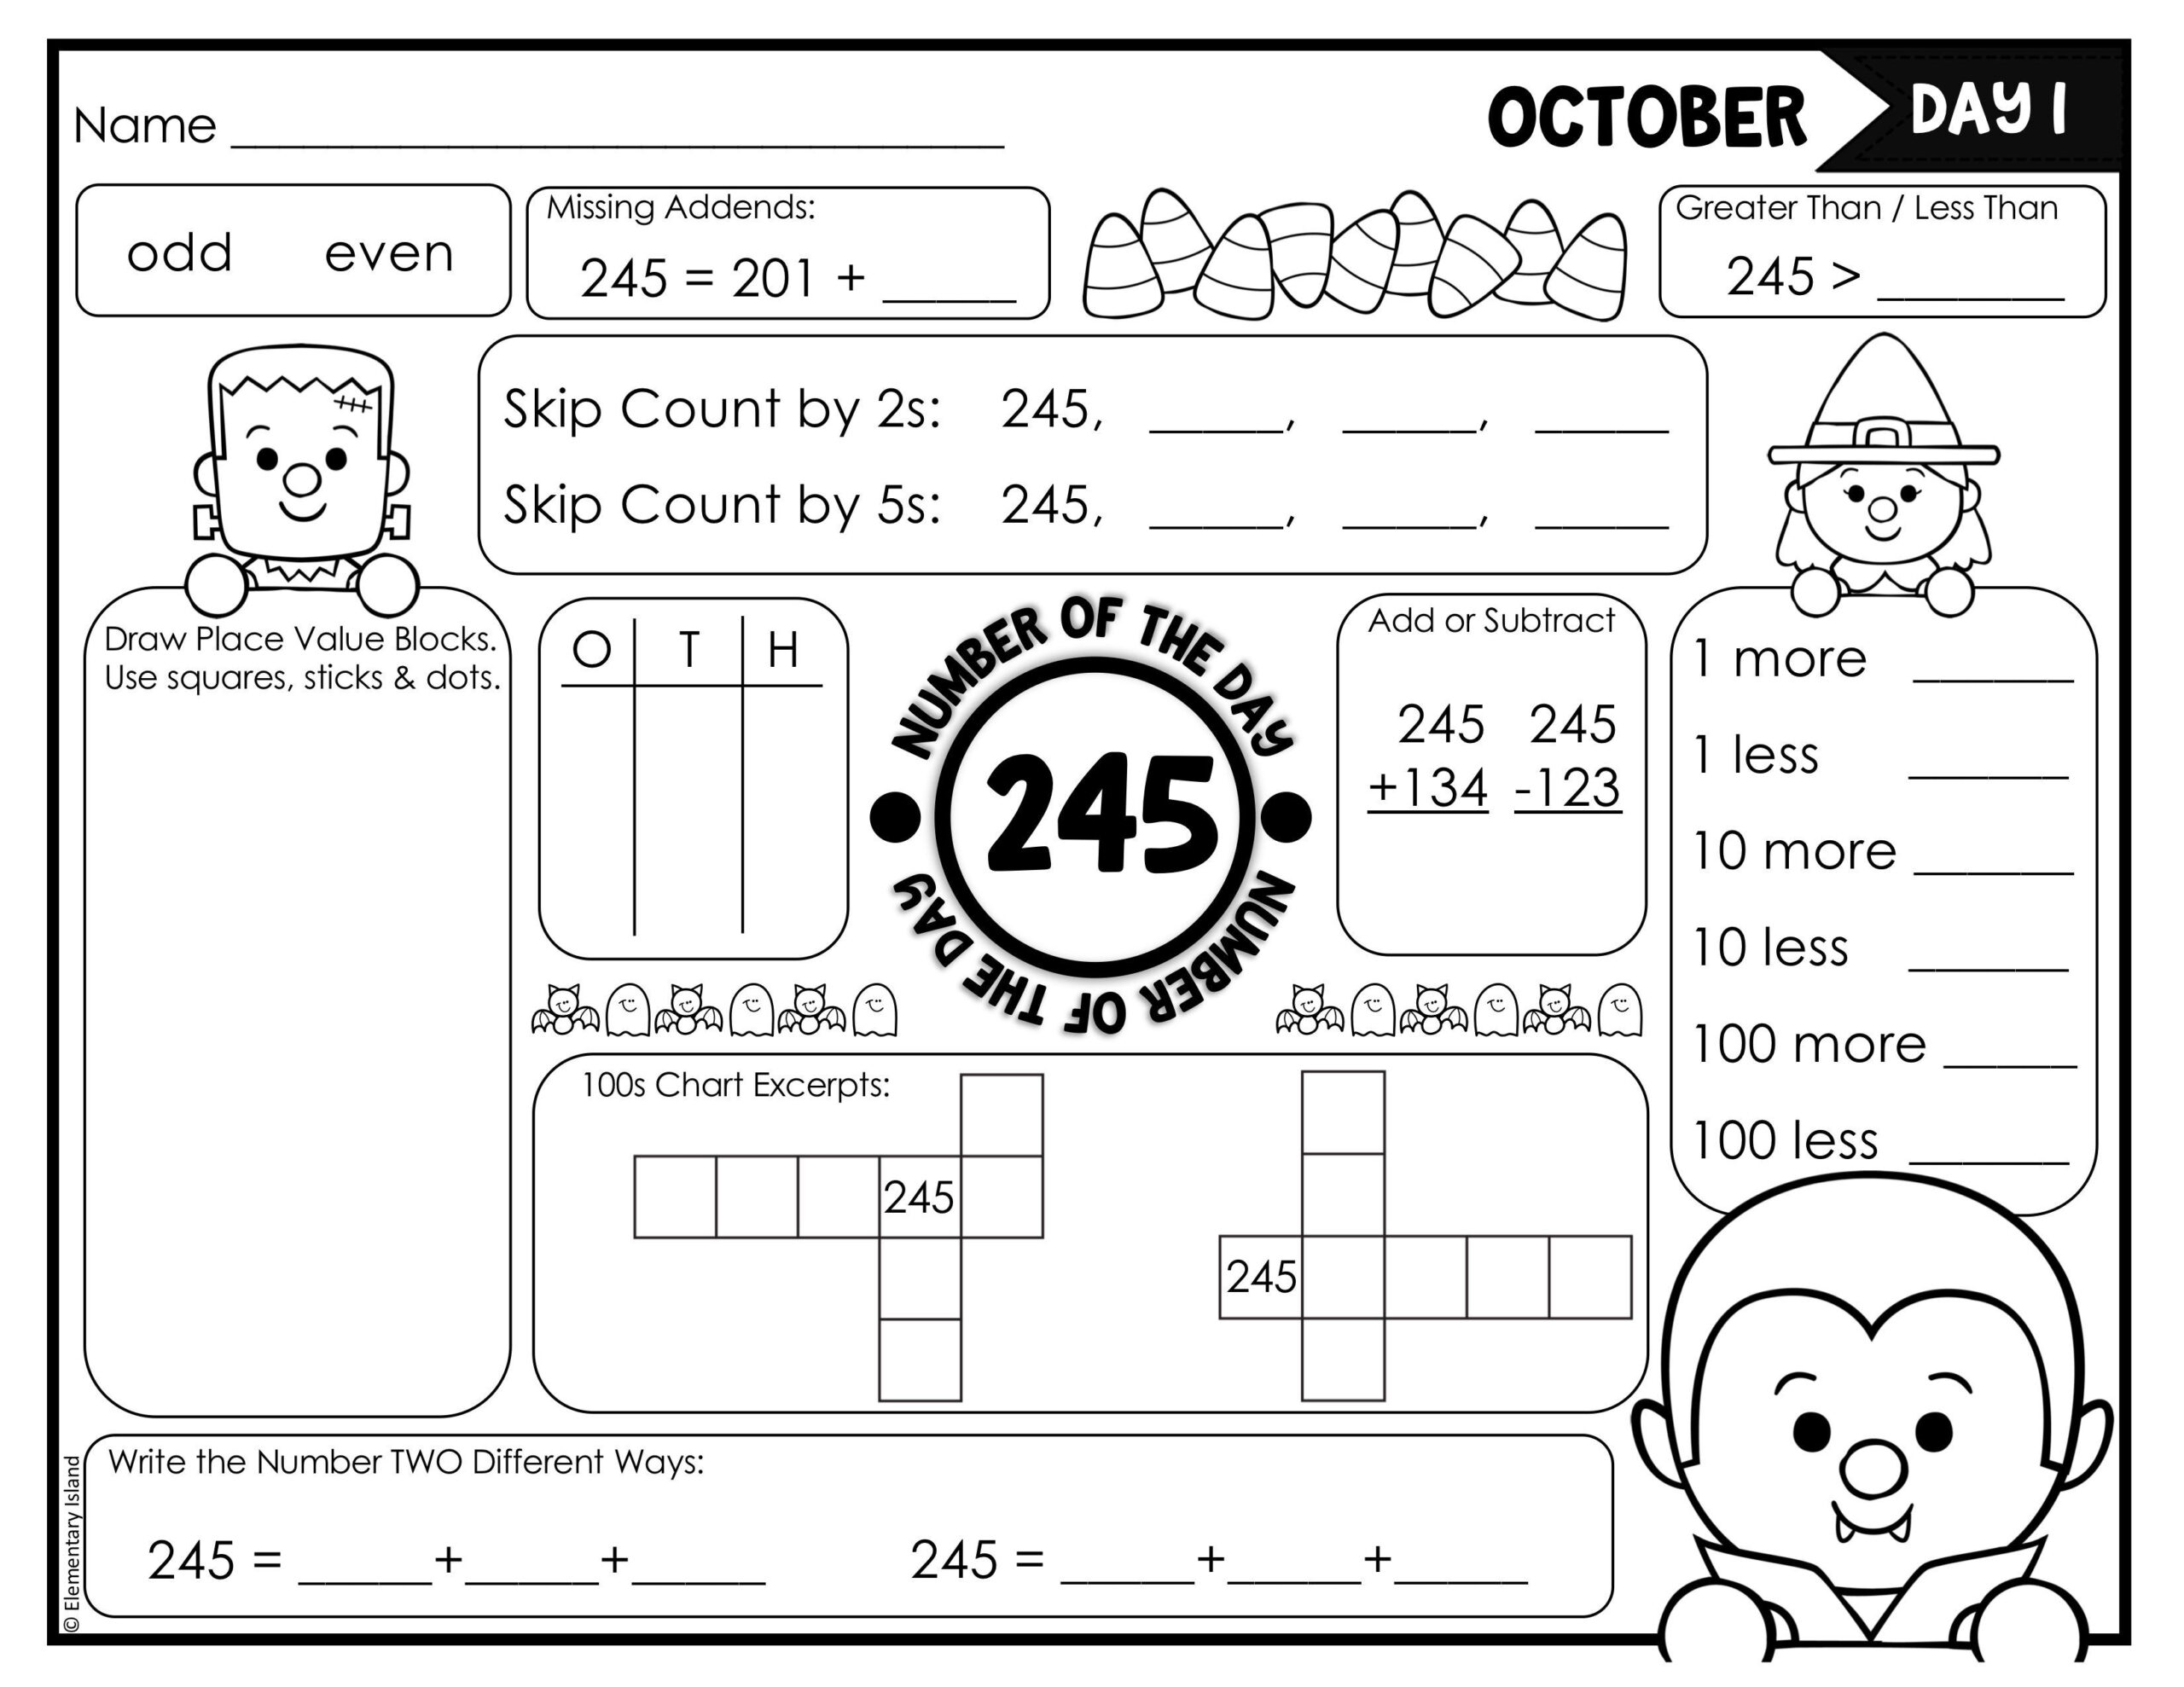 Use These Halloween Number Of The Day Printables To Practice